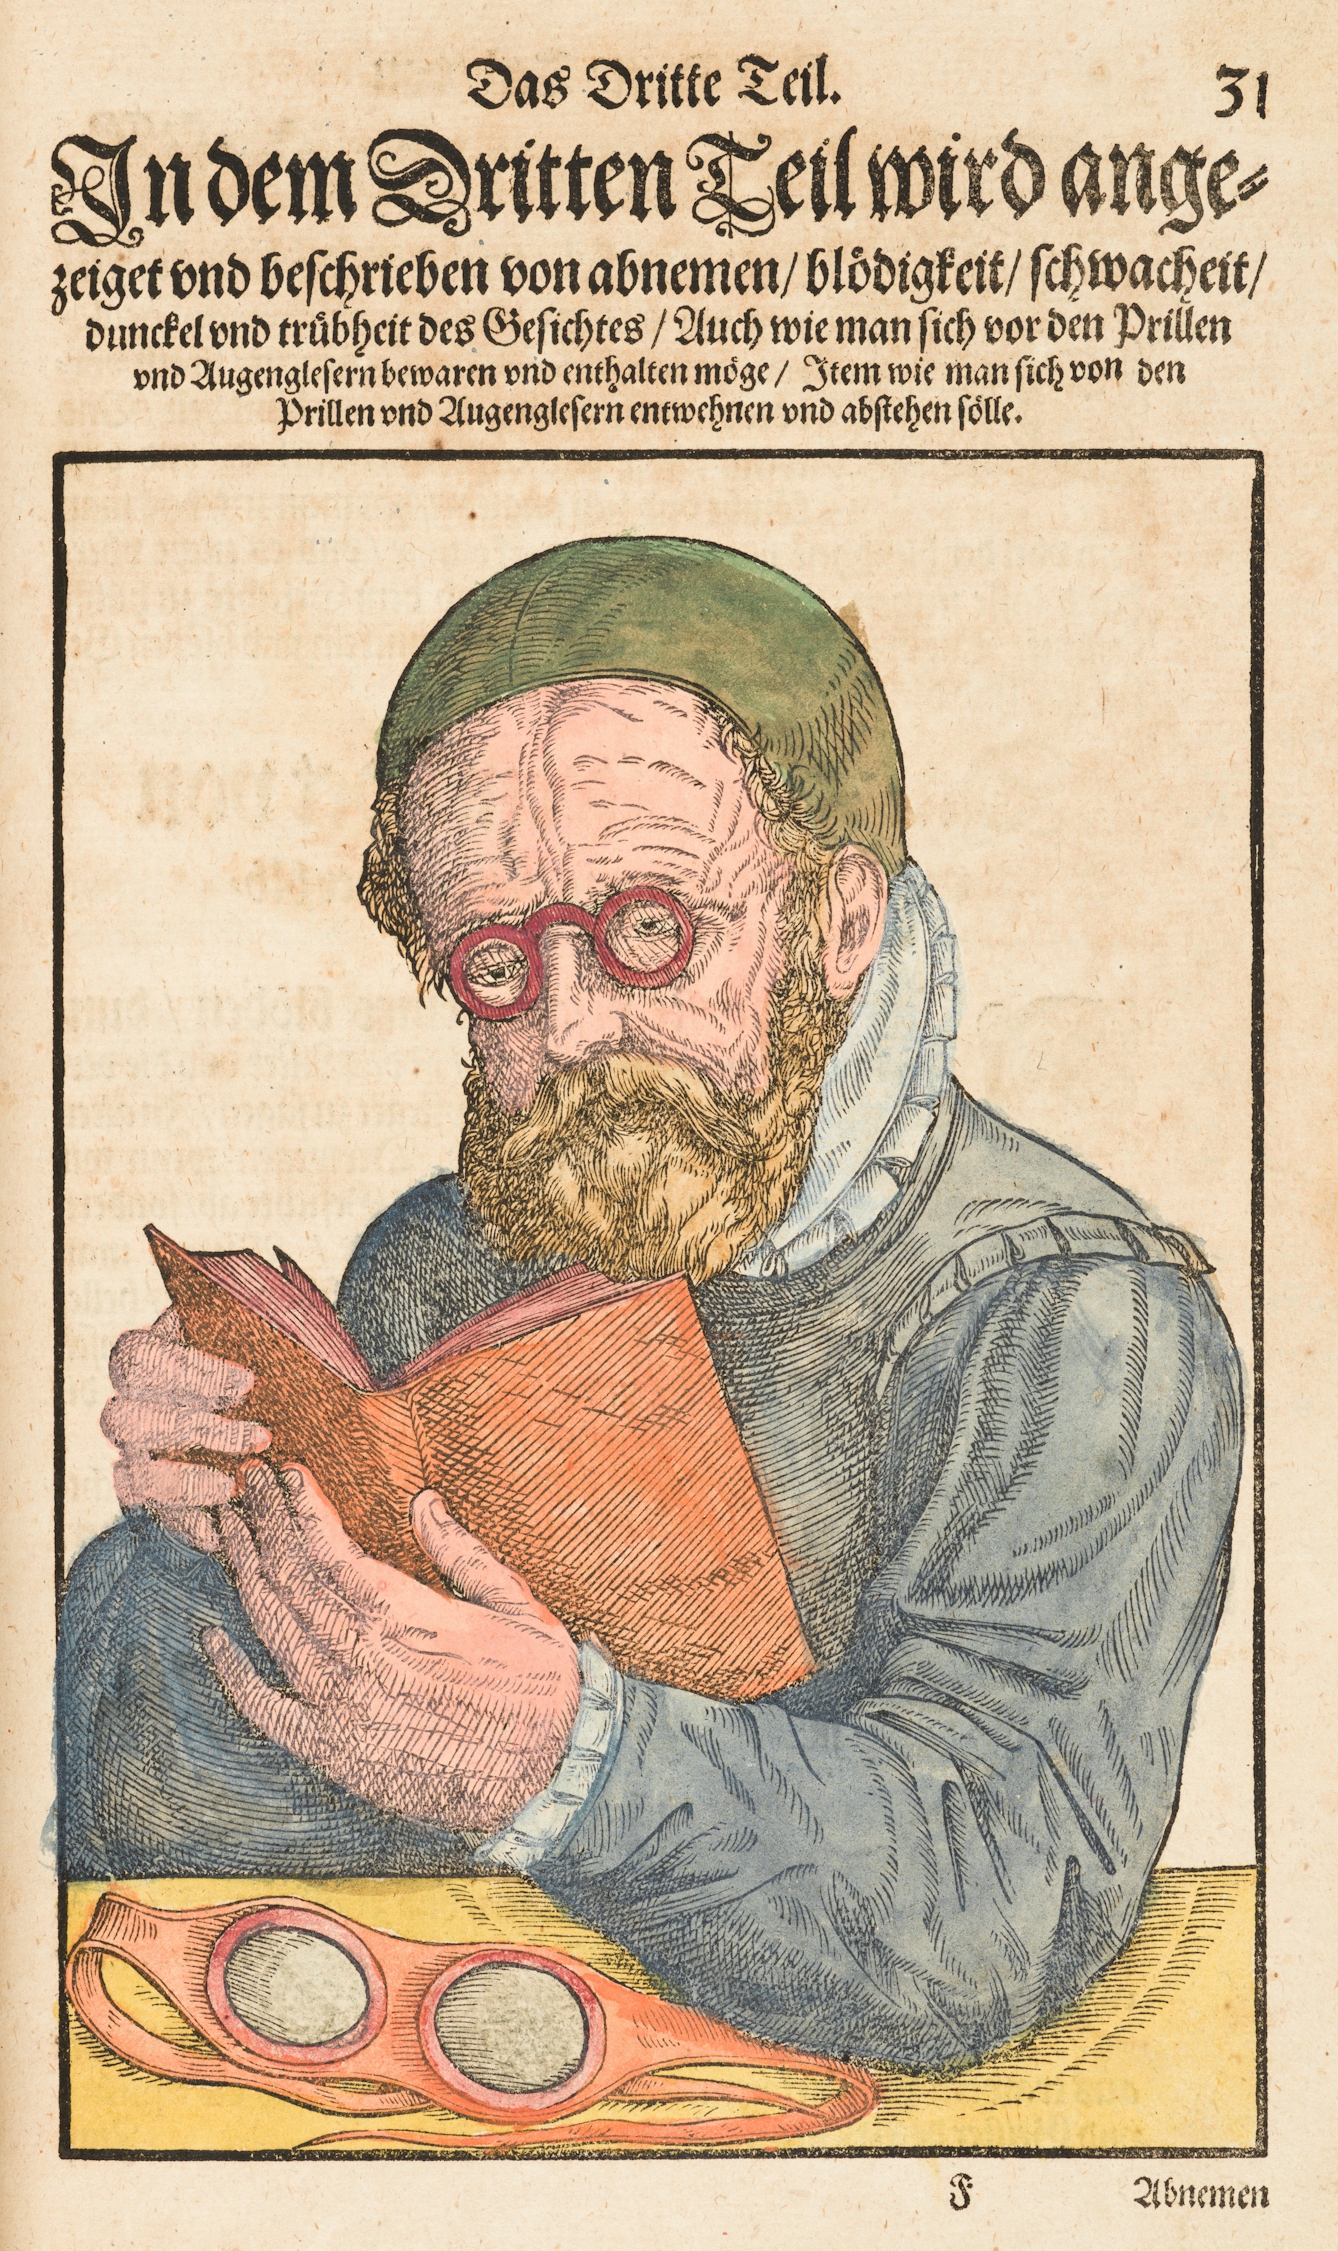 Coloured engraving from a 16th century book showing a man at a table holding an open book in his hands. He is wearing small round glasses. On the table in front of him are a pair red goggles. Above the engraving is ornately written German text.